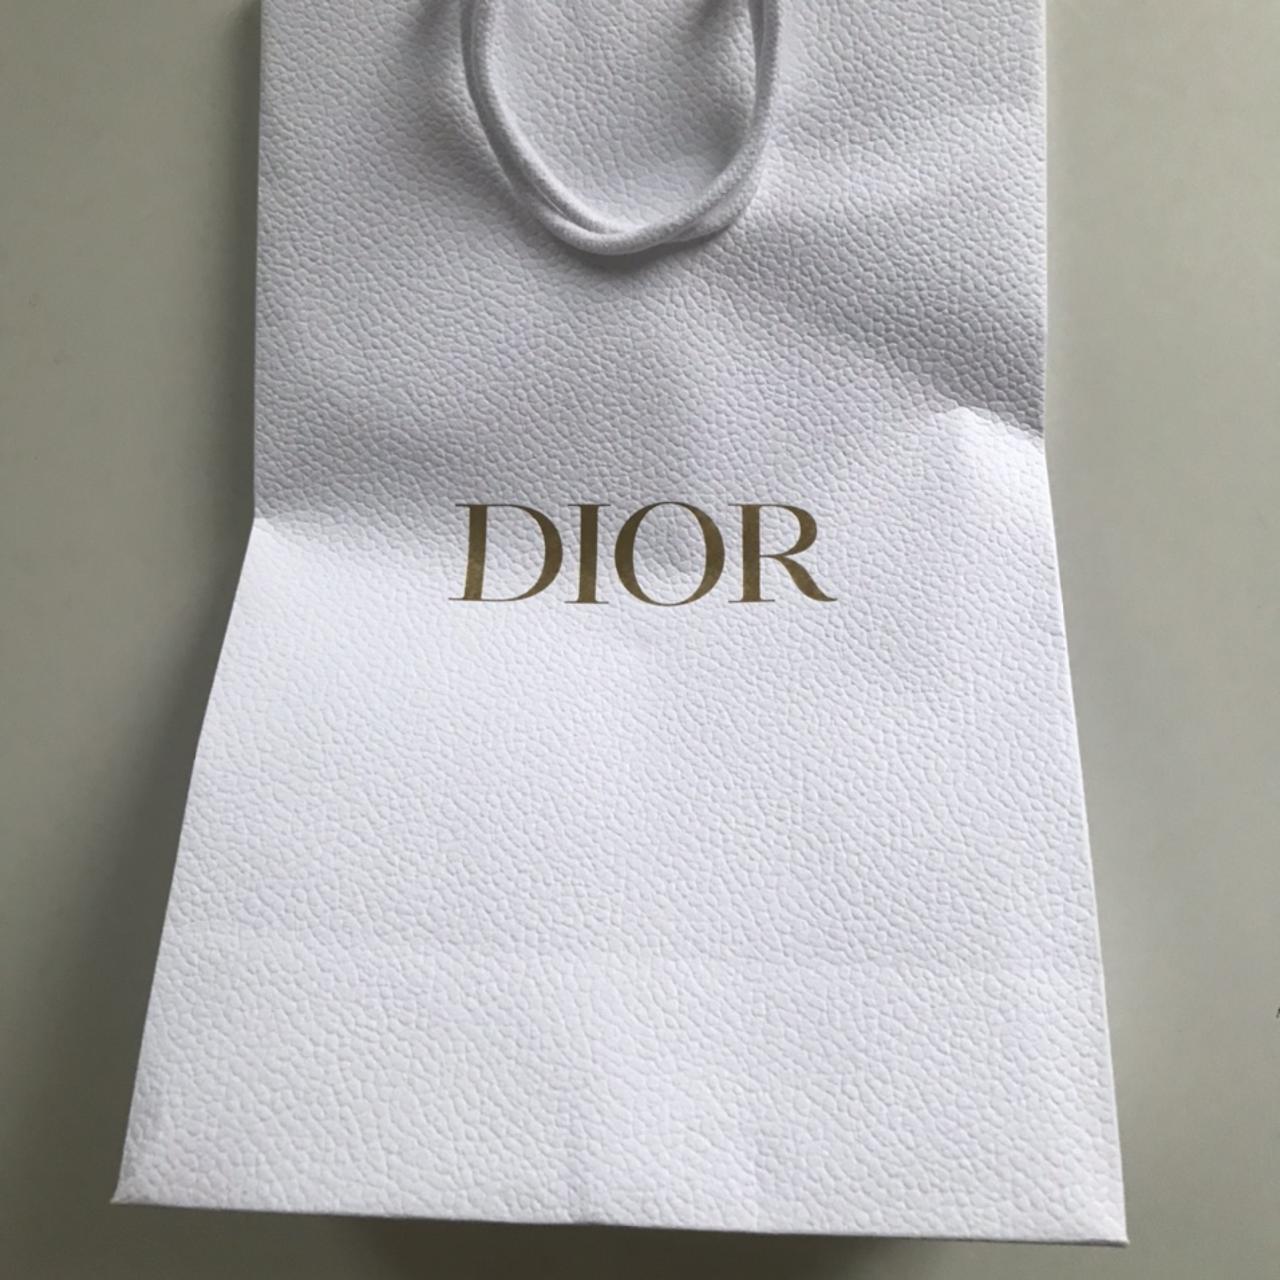 The Dior Art of Gifting the tradition and savoirfaire of the gift  DIOR  GB